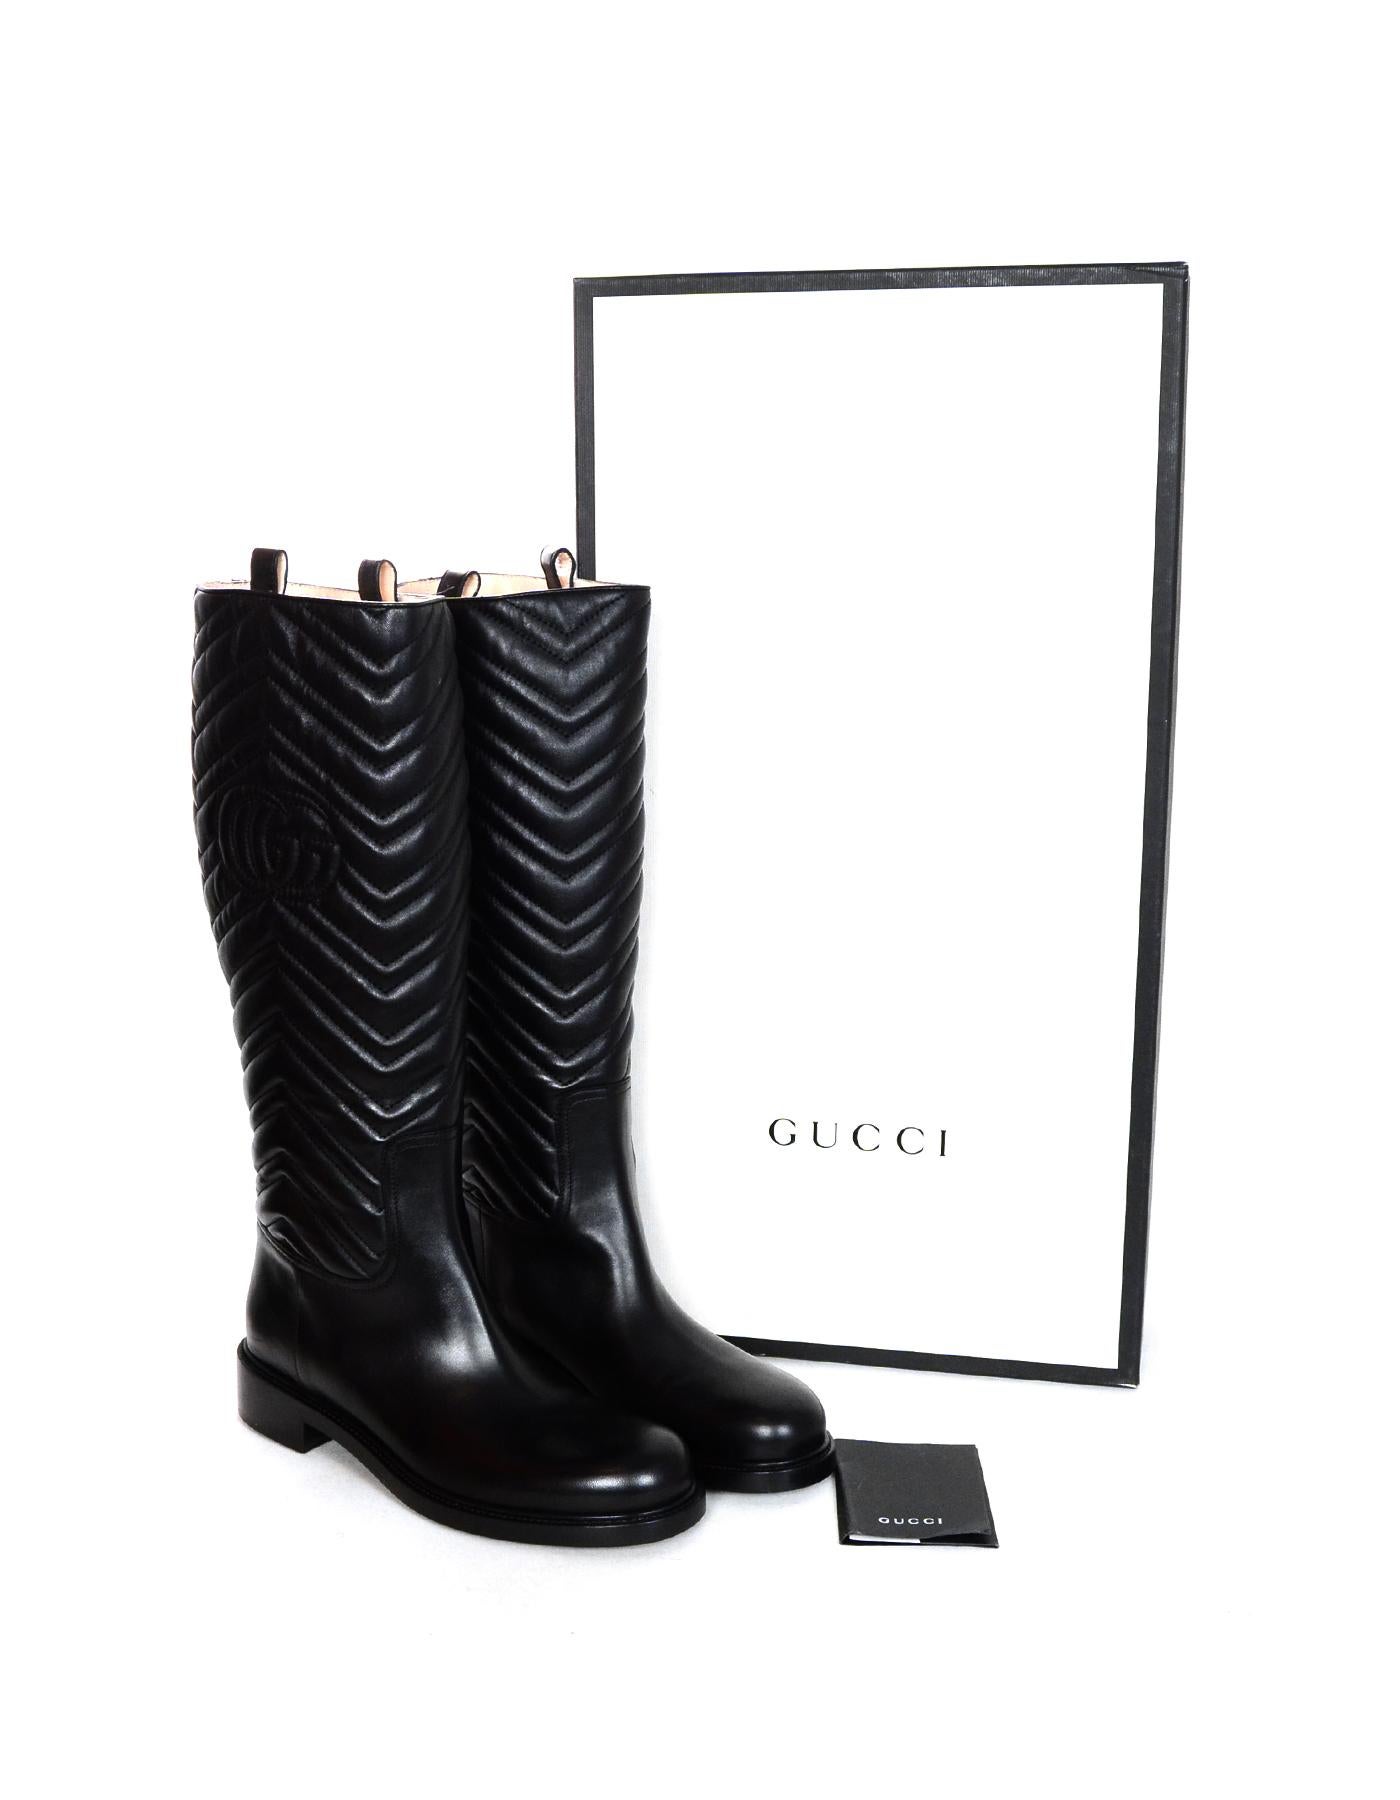 Gucci Black Matlasse Quilted Nappa Charlotte Knee High Riding Boots Sz 41 2